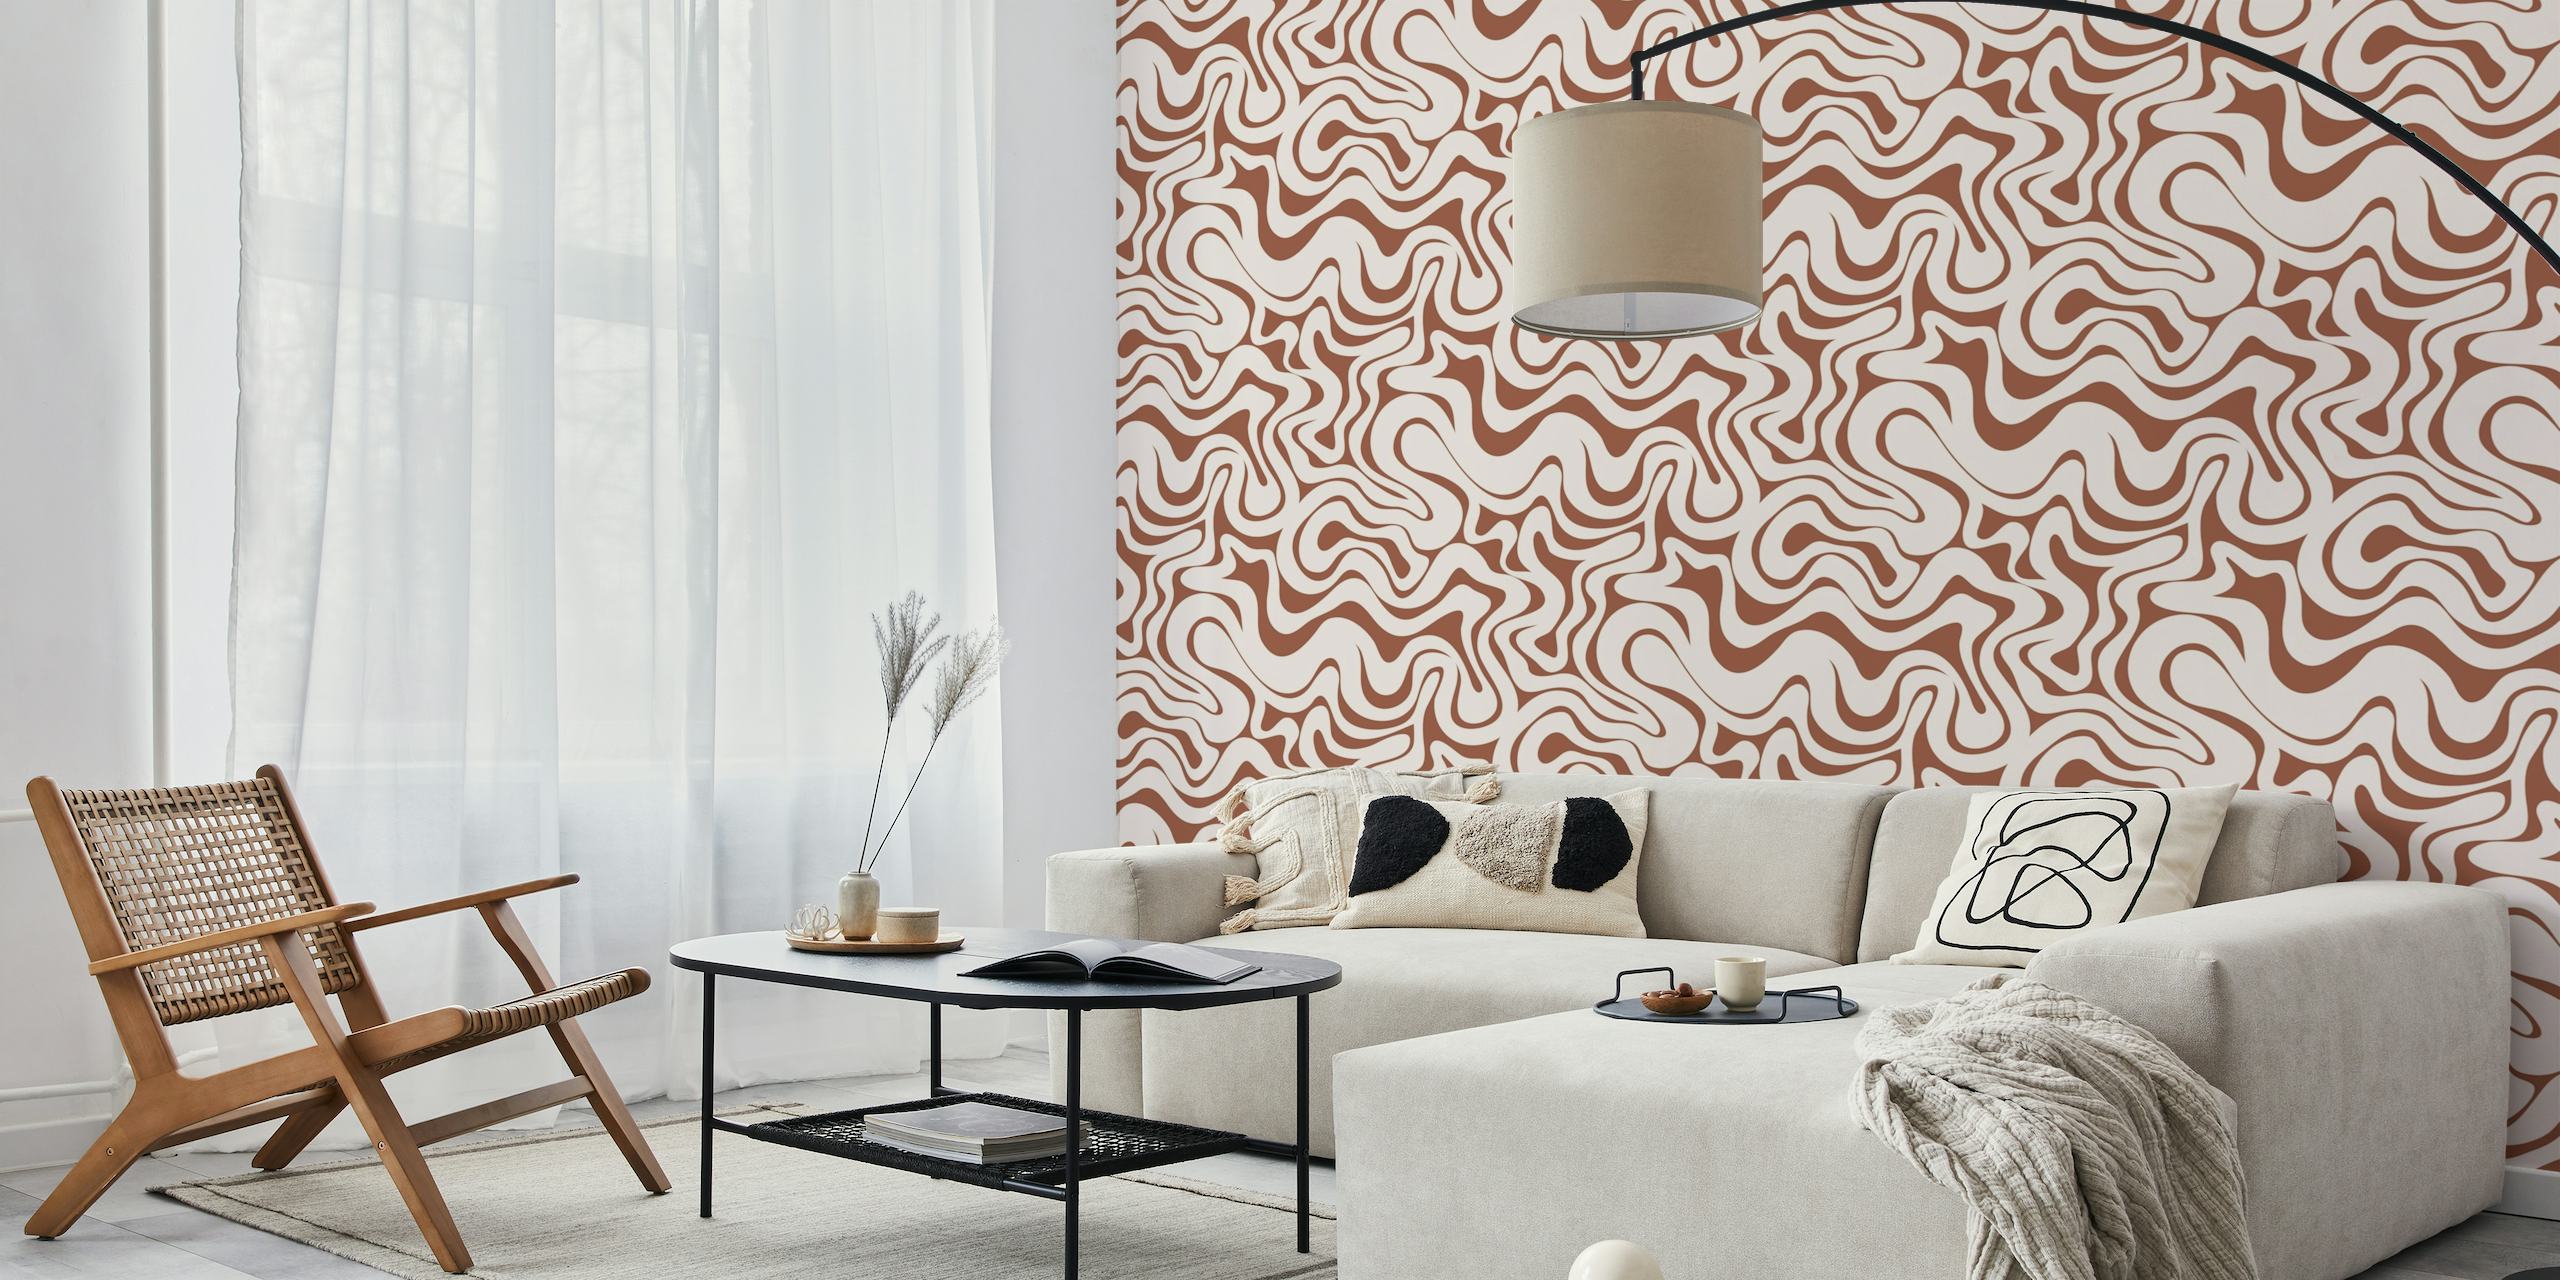 Abstract animal pattern wall mural with serene and sophisticated design